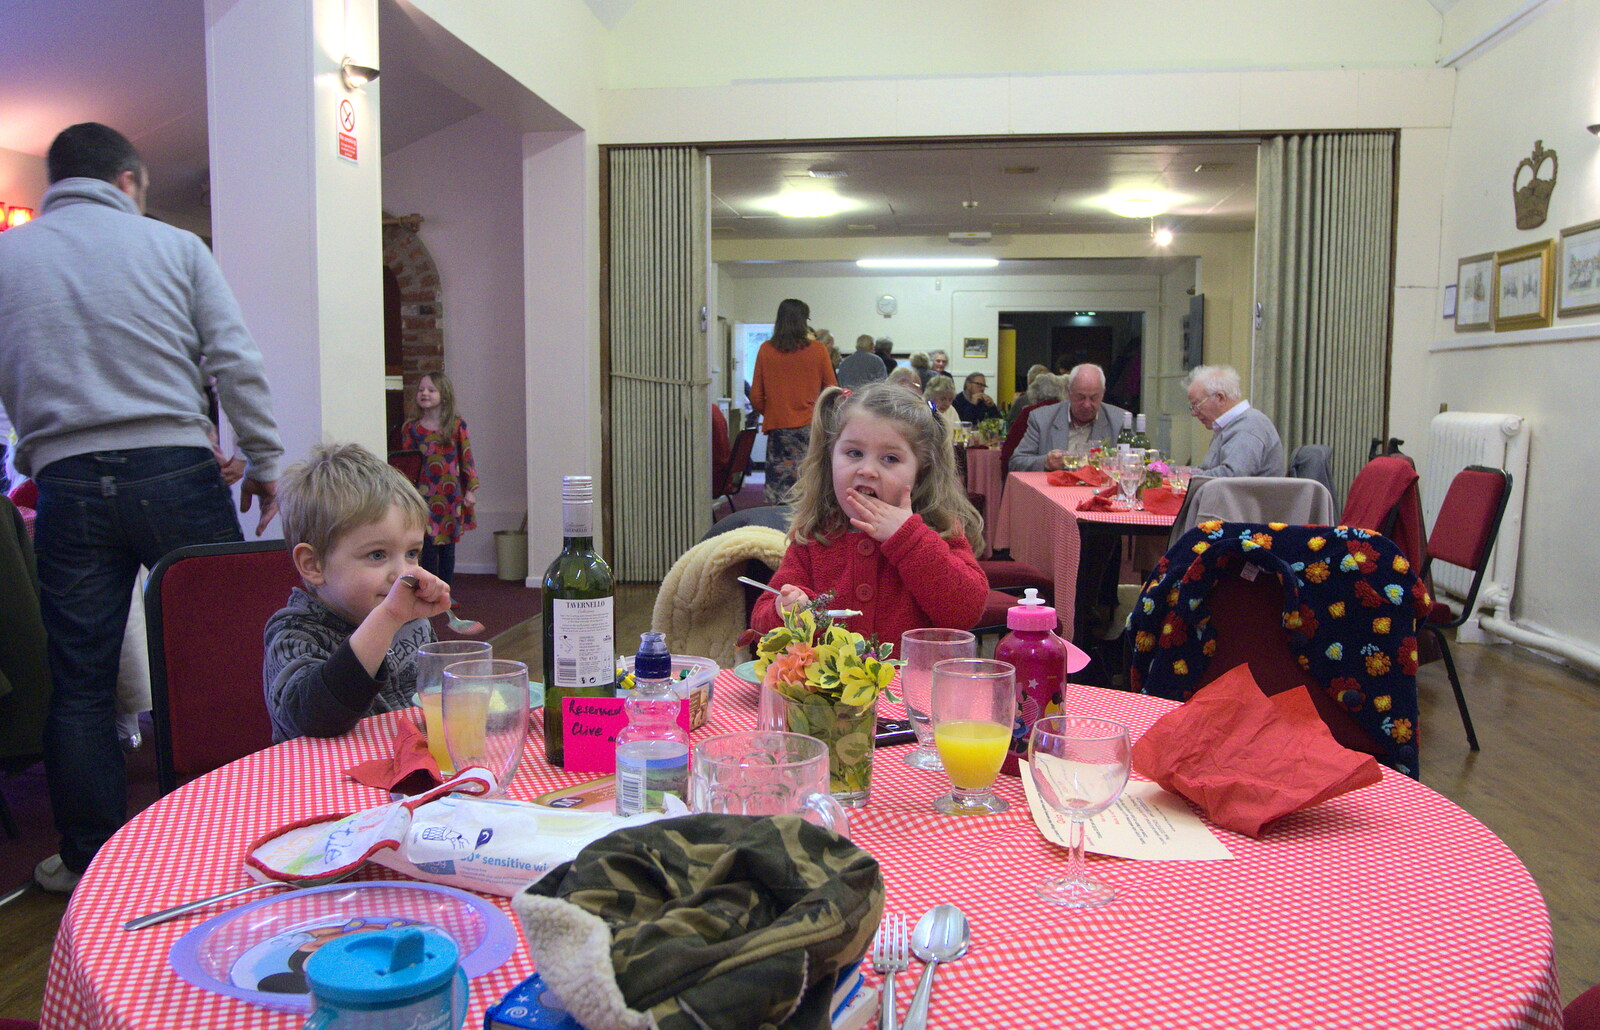 Fred and Amelia from Sunday Lunch at the Village Hall, Brome, Suffolk - 3rd February 2013